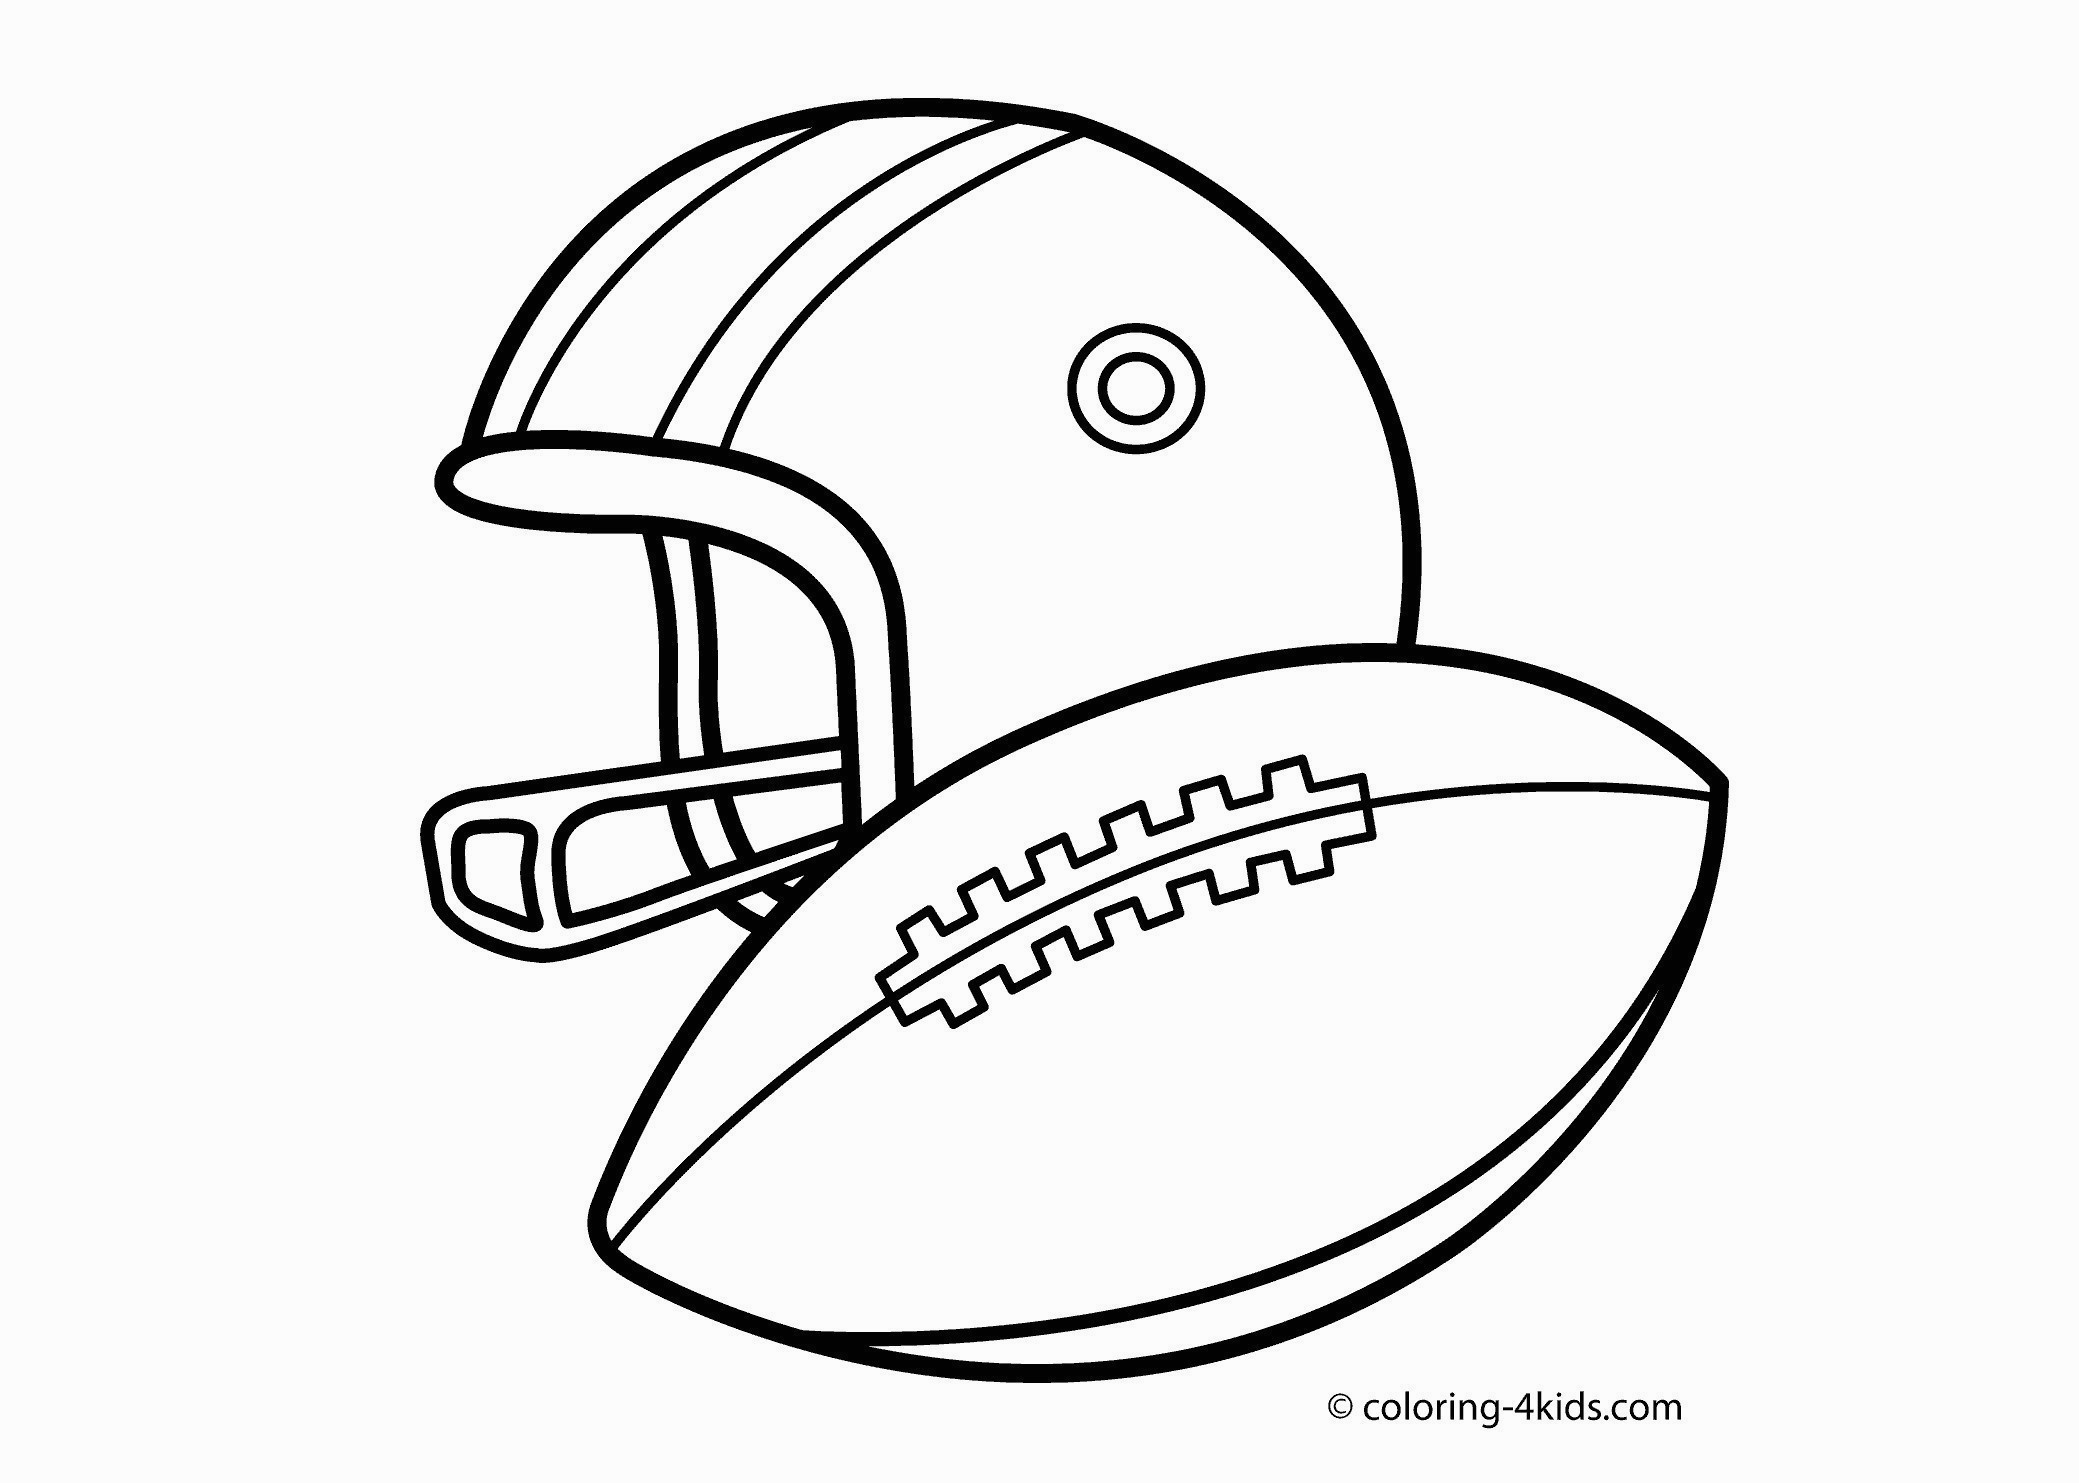 Sports Coloring Book Pages Category Printable Coloring Kids 0 Xorforums